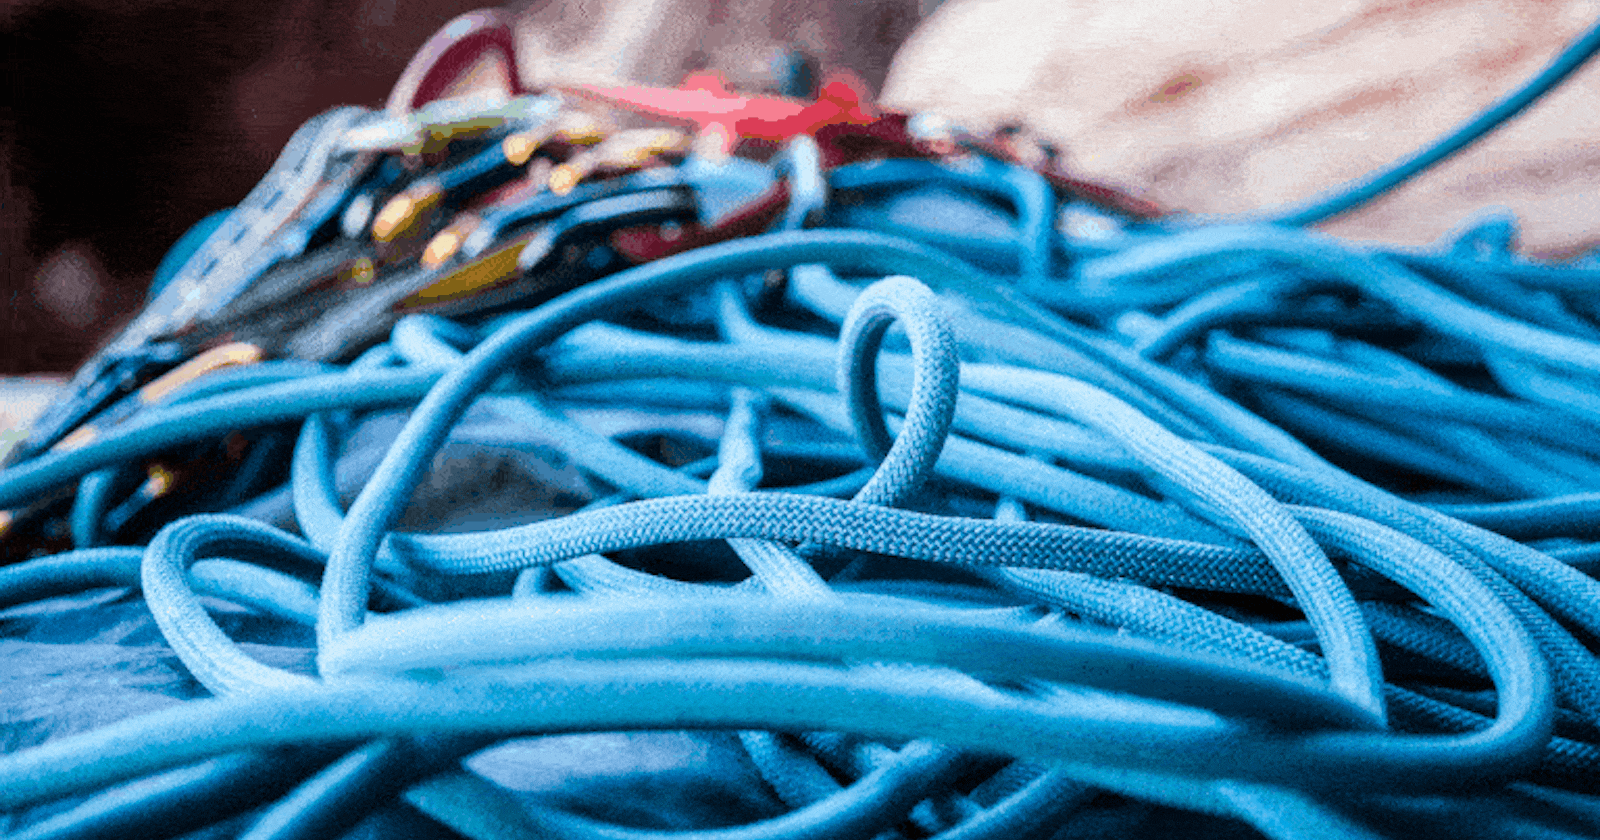 Untangle your strings in Java